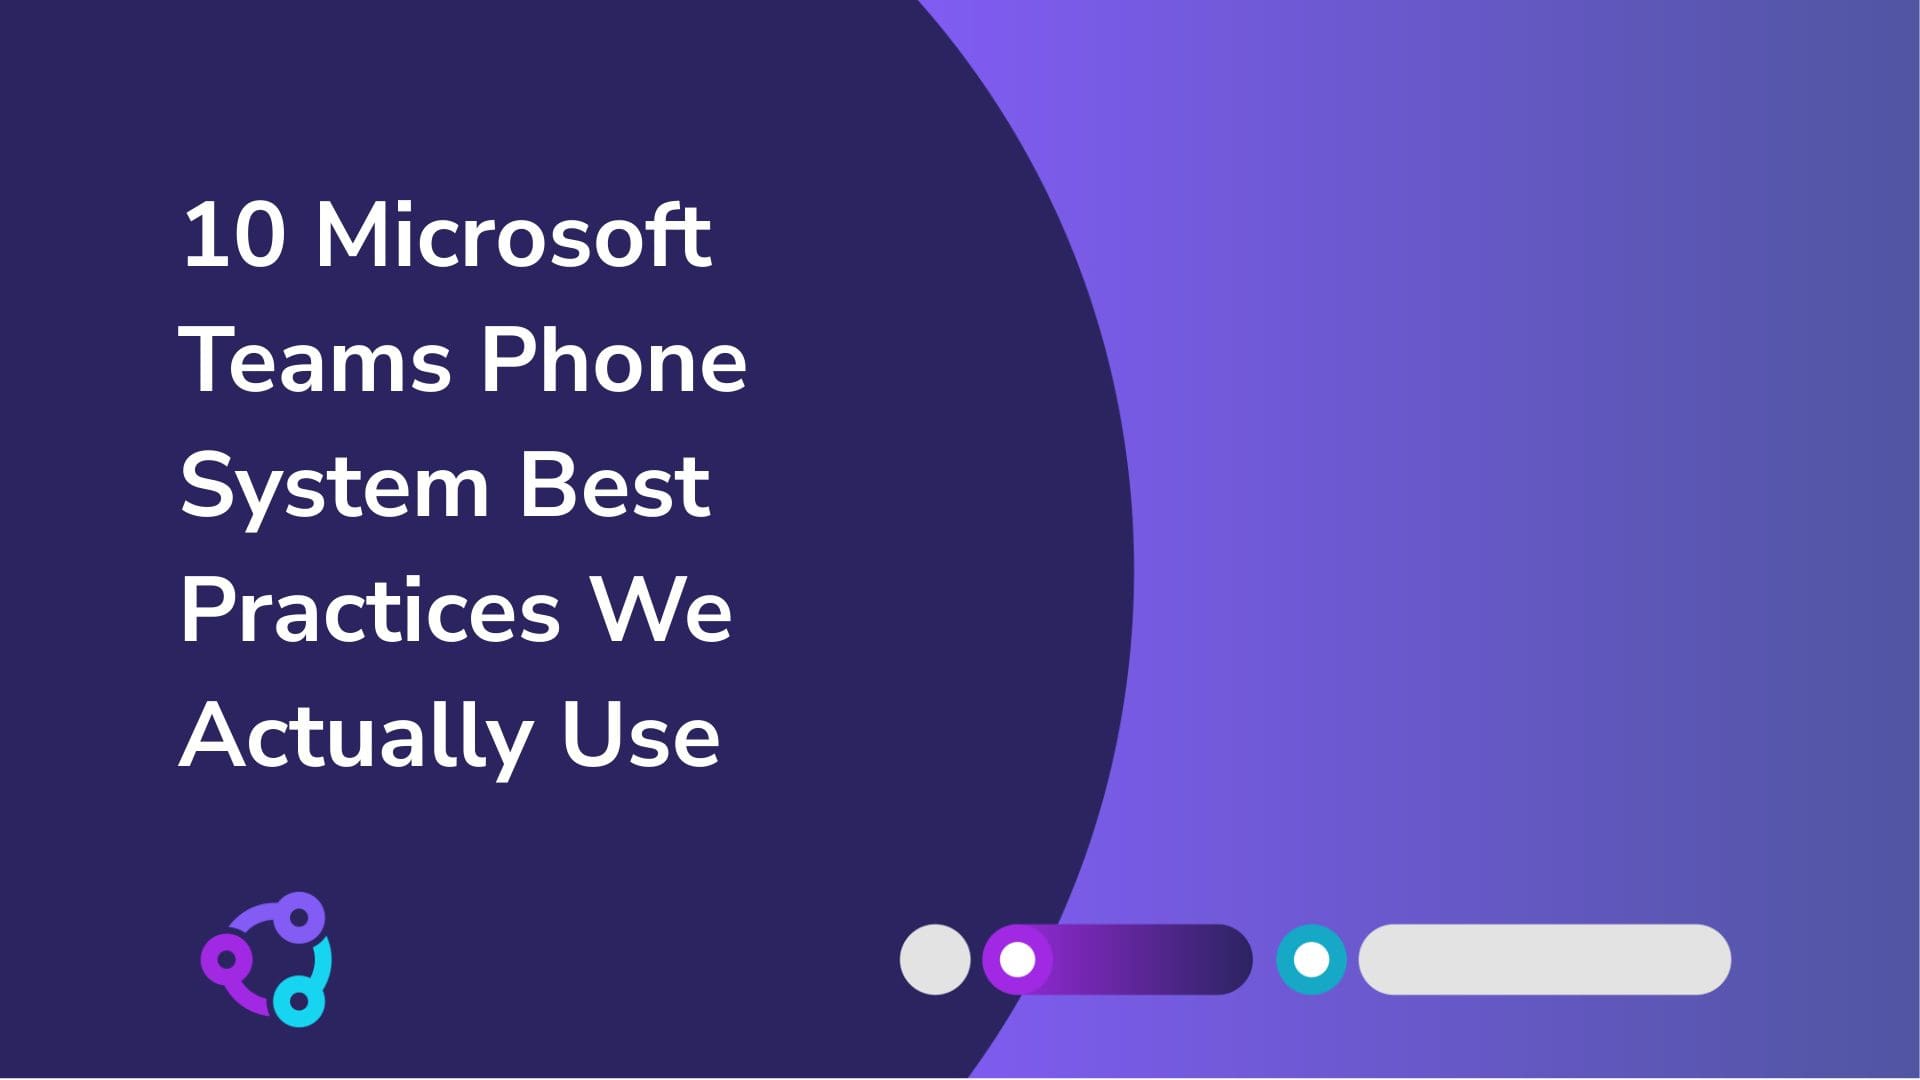 10 Microsoft Teams Phone System Best Practices We Actually Use